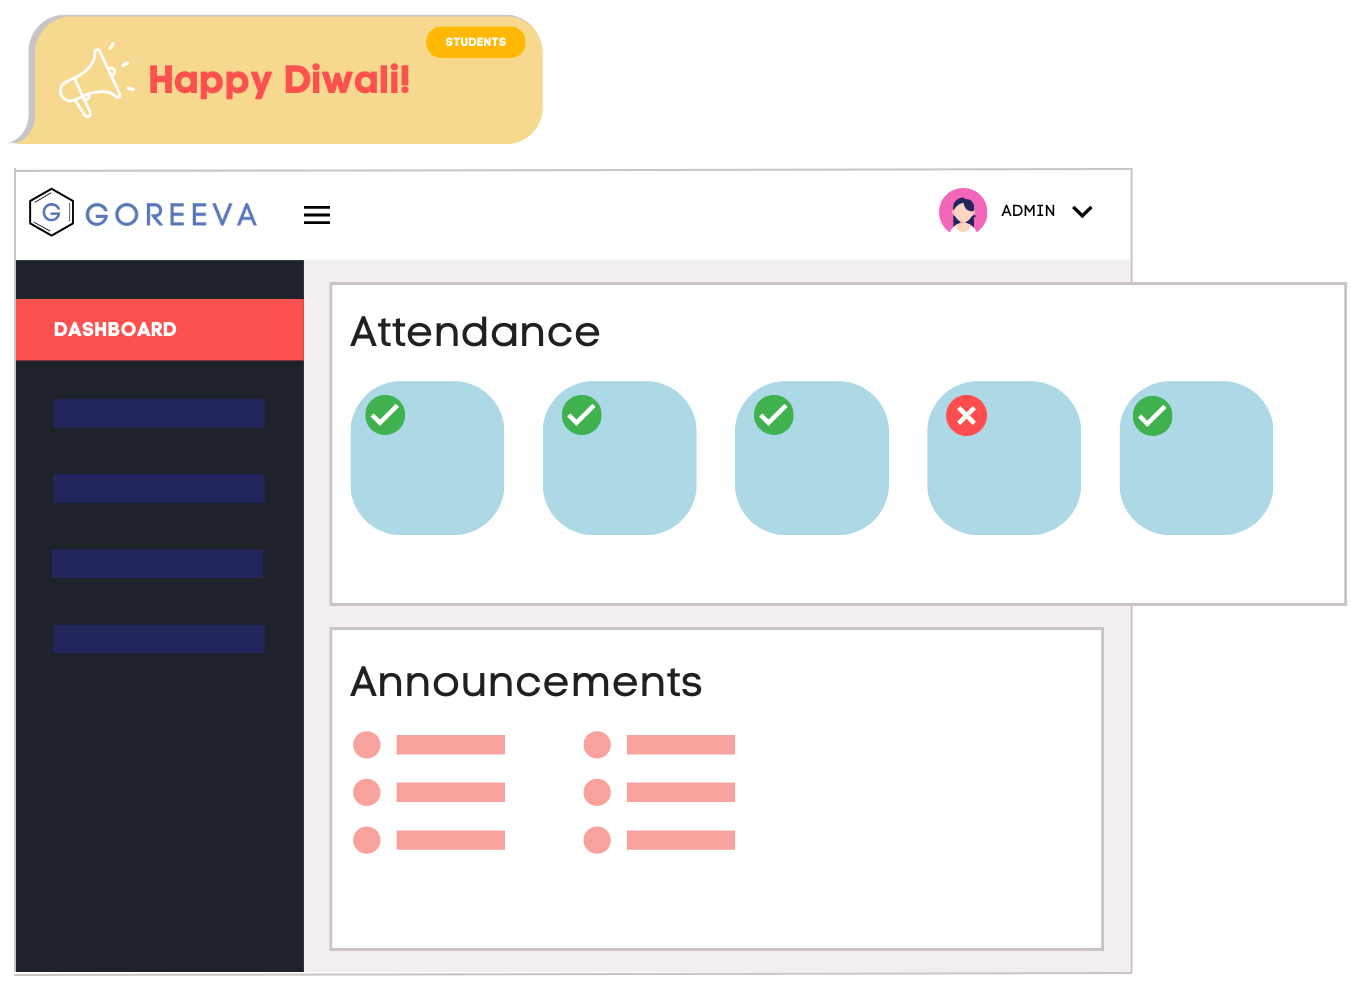 Dashboard with attendance and Announcements